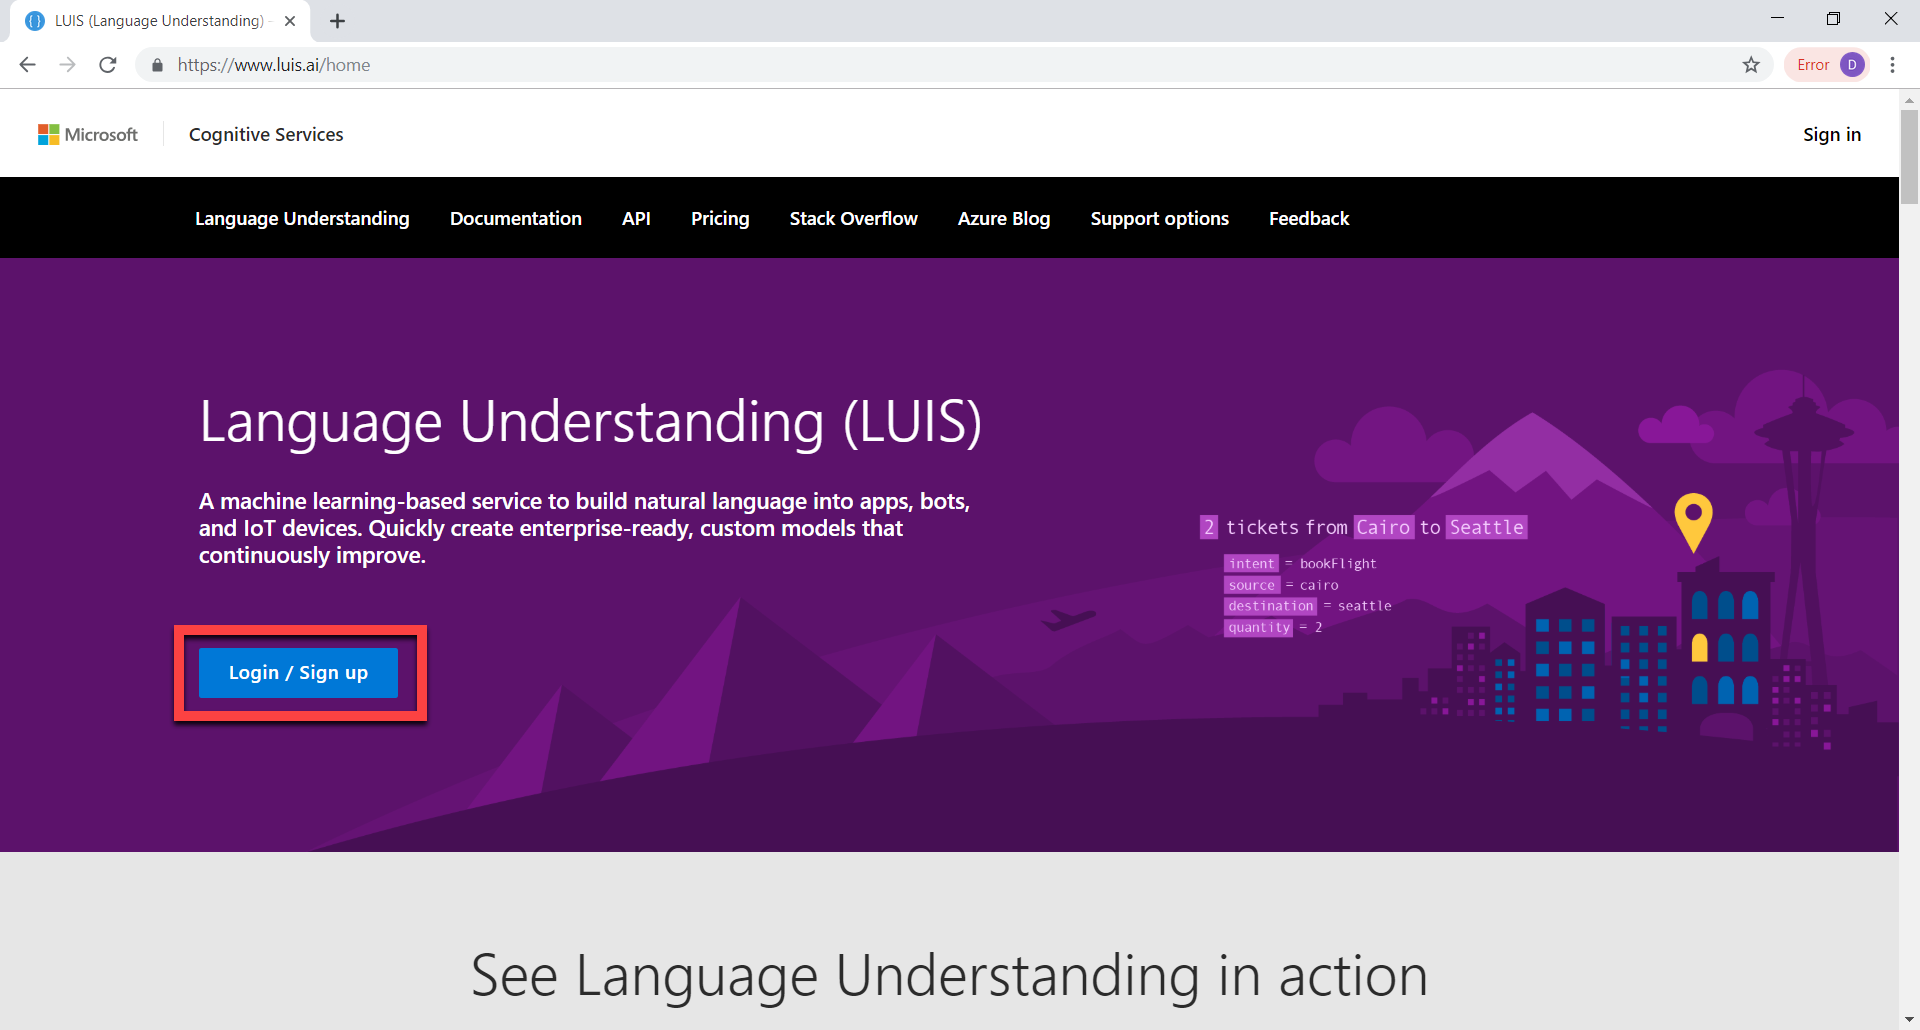 LUIS homepage for Microsoft Cognitive Services